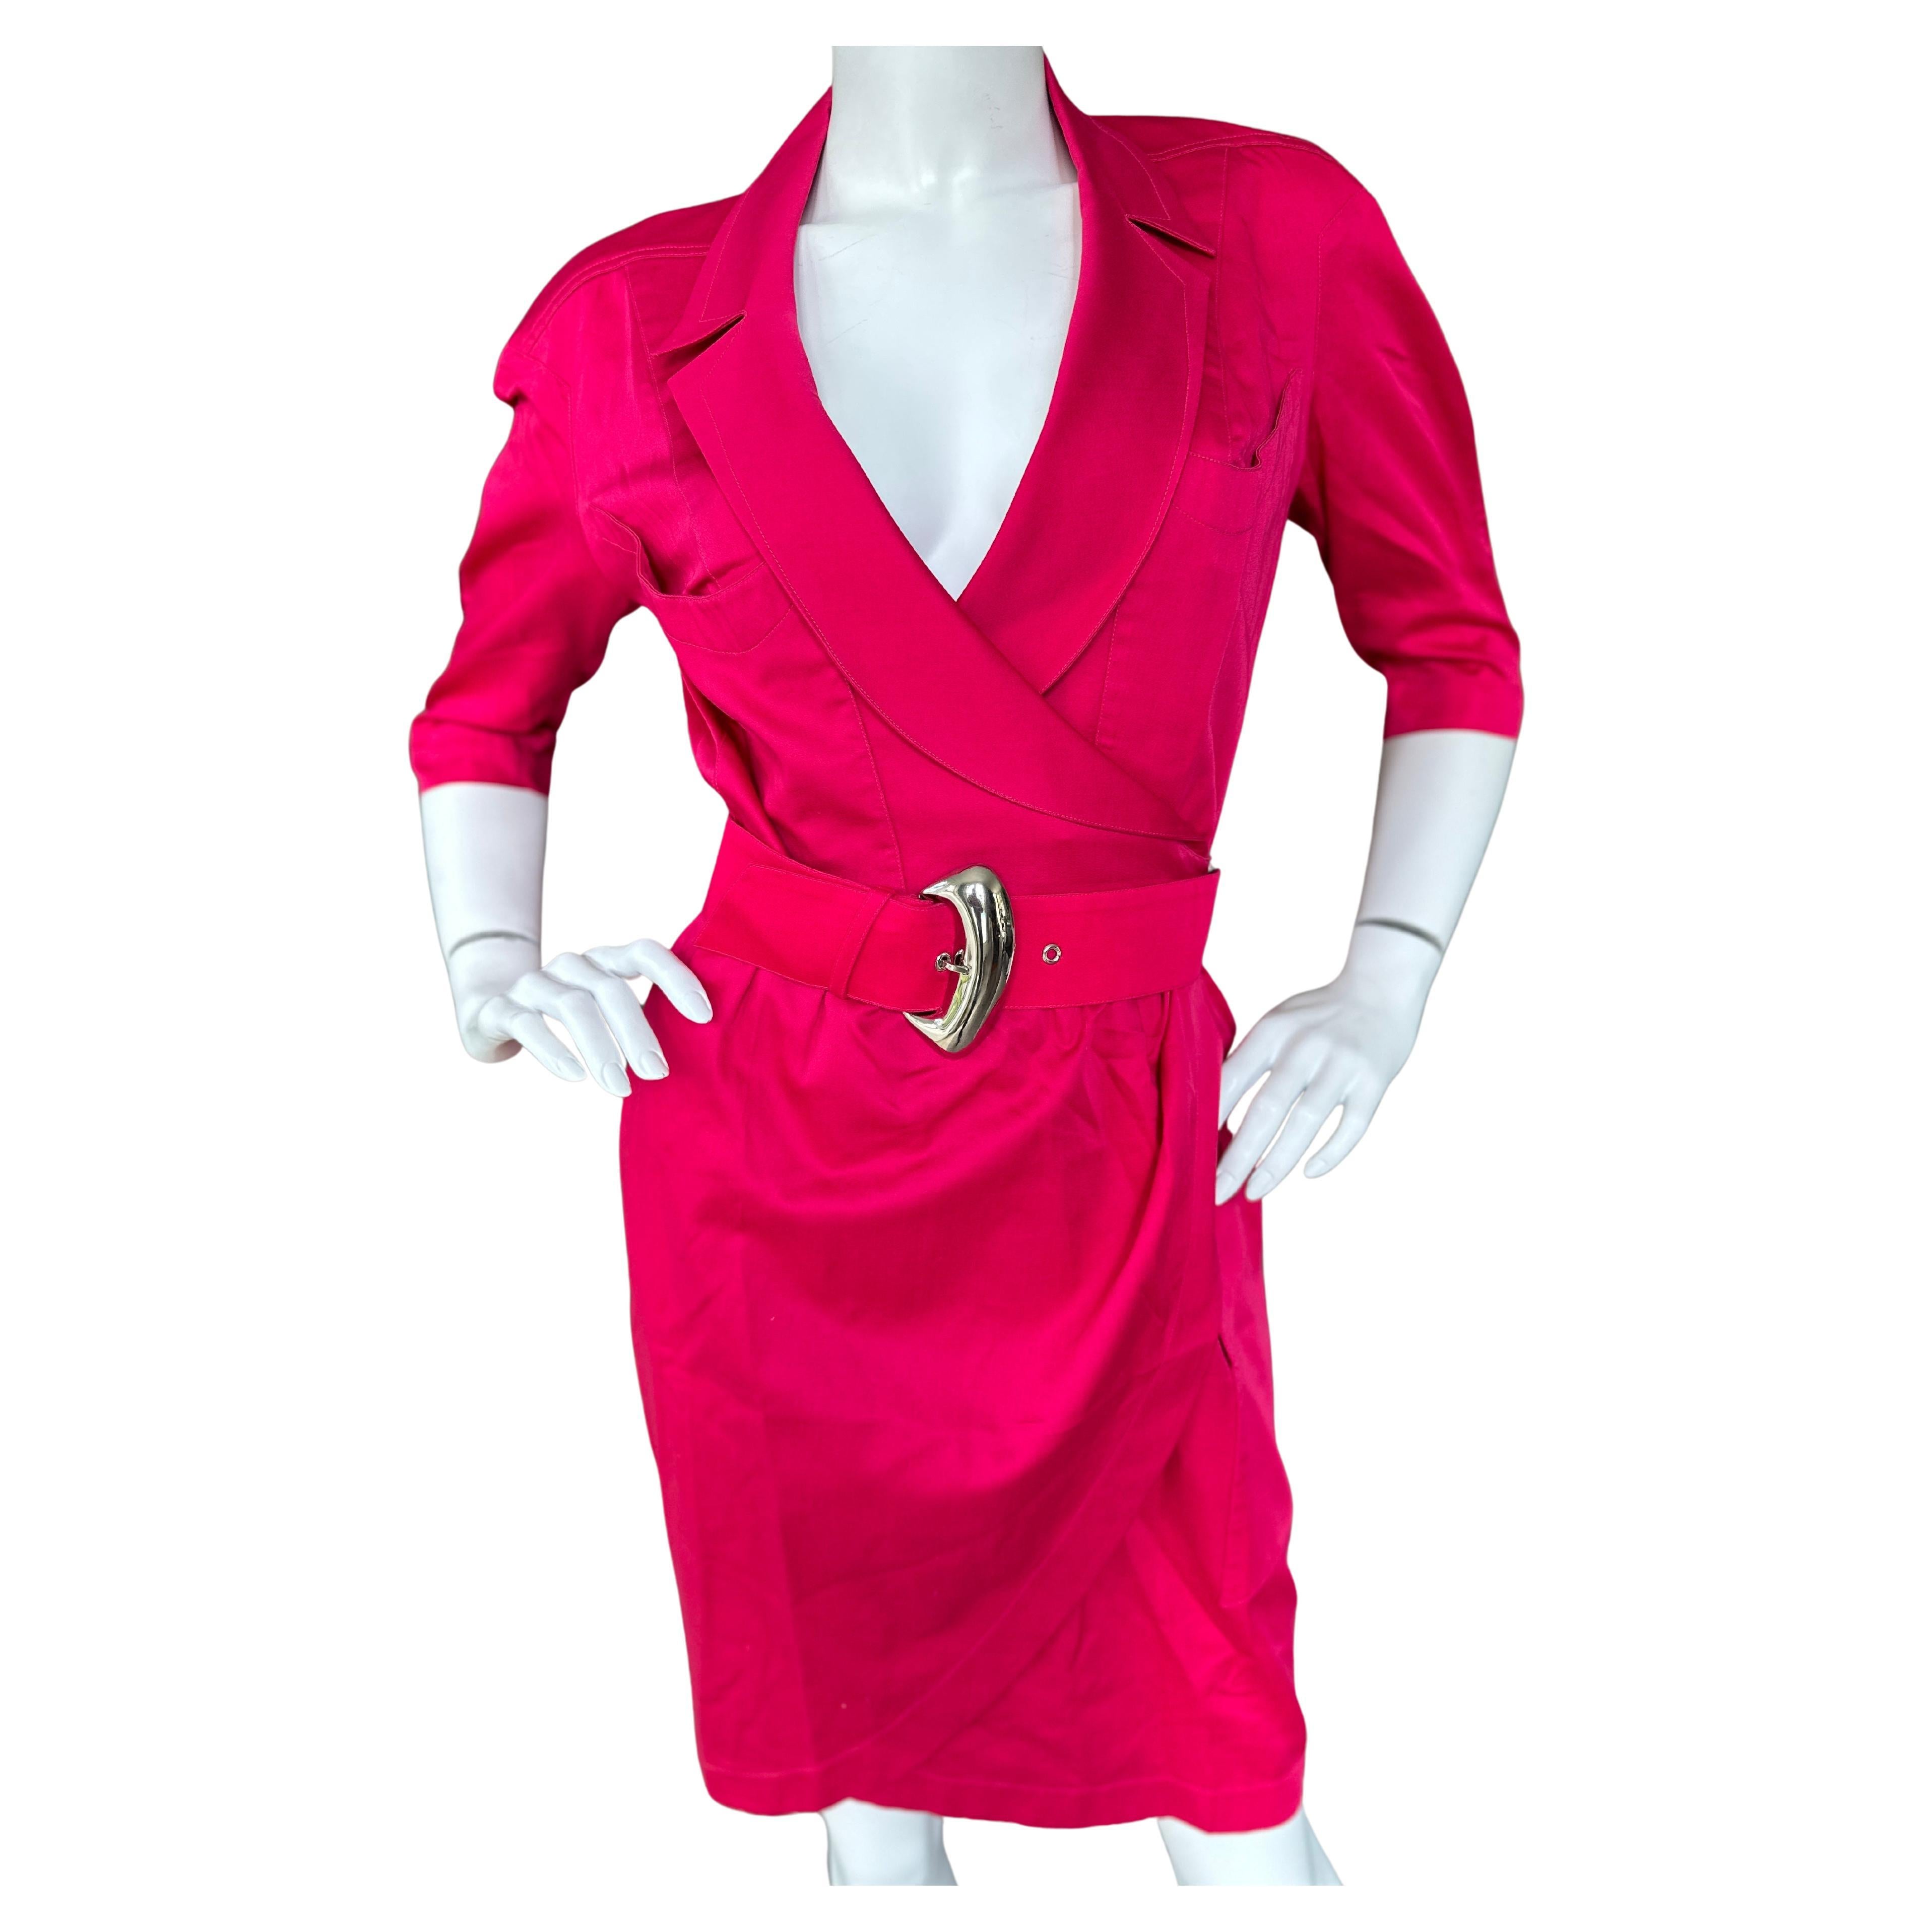 Thierry Mugler Vintage 1980's Hot Pink Silk Wrap Style Dress with Mod Buckle For Sale